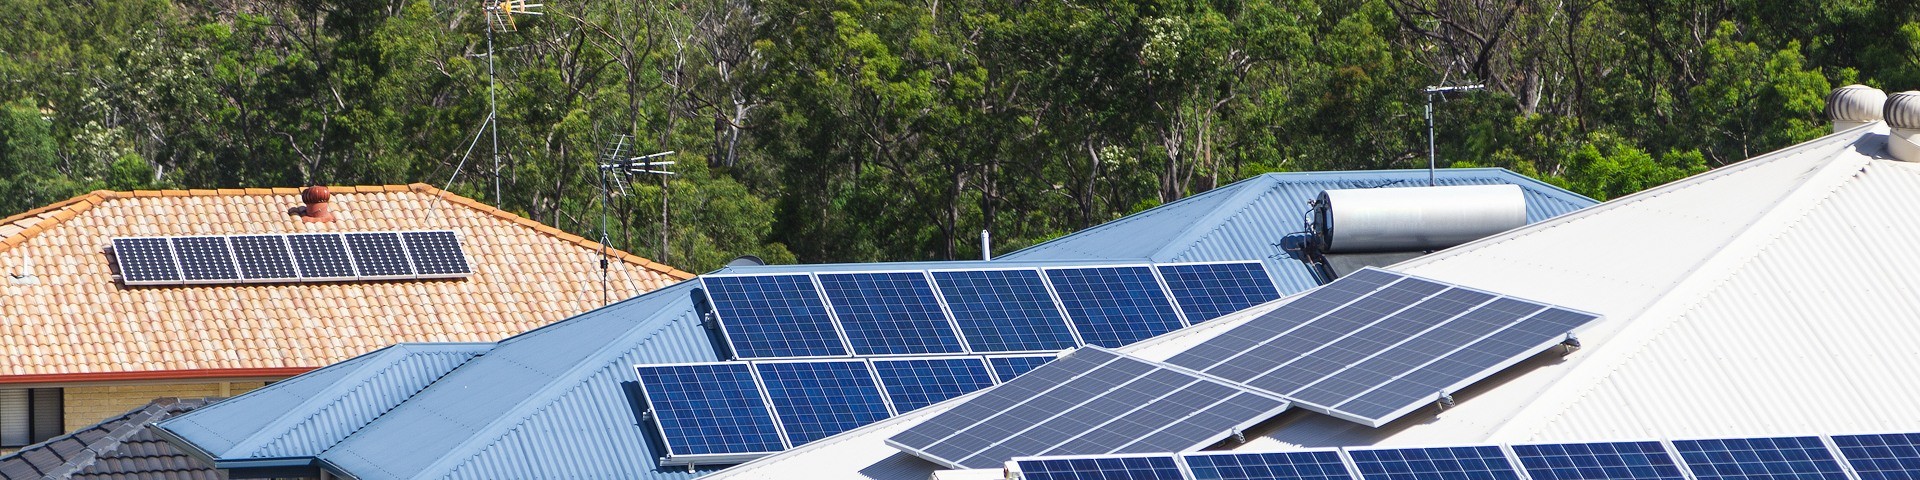 Australian homes with solar panels installed.